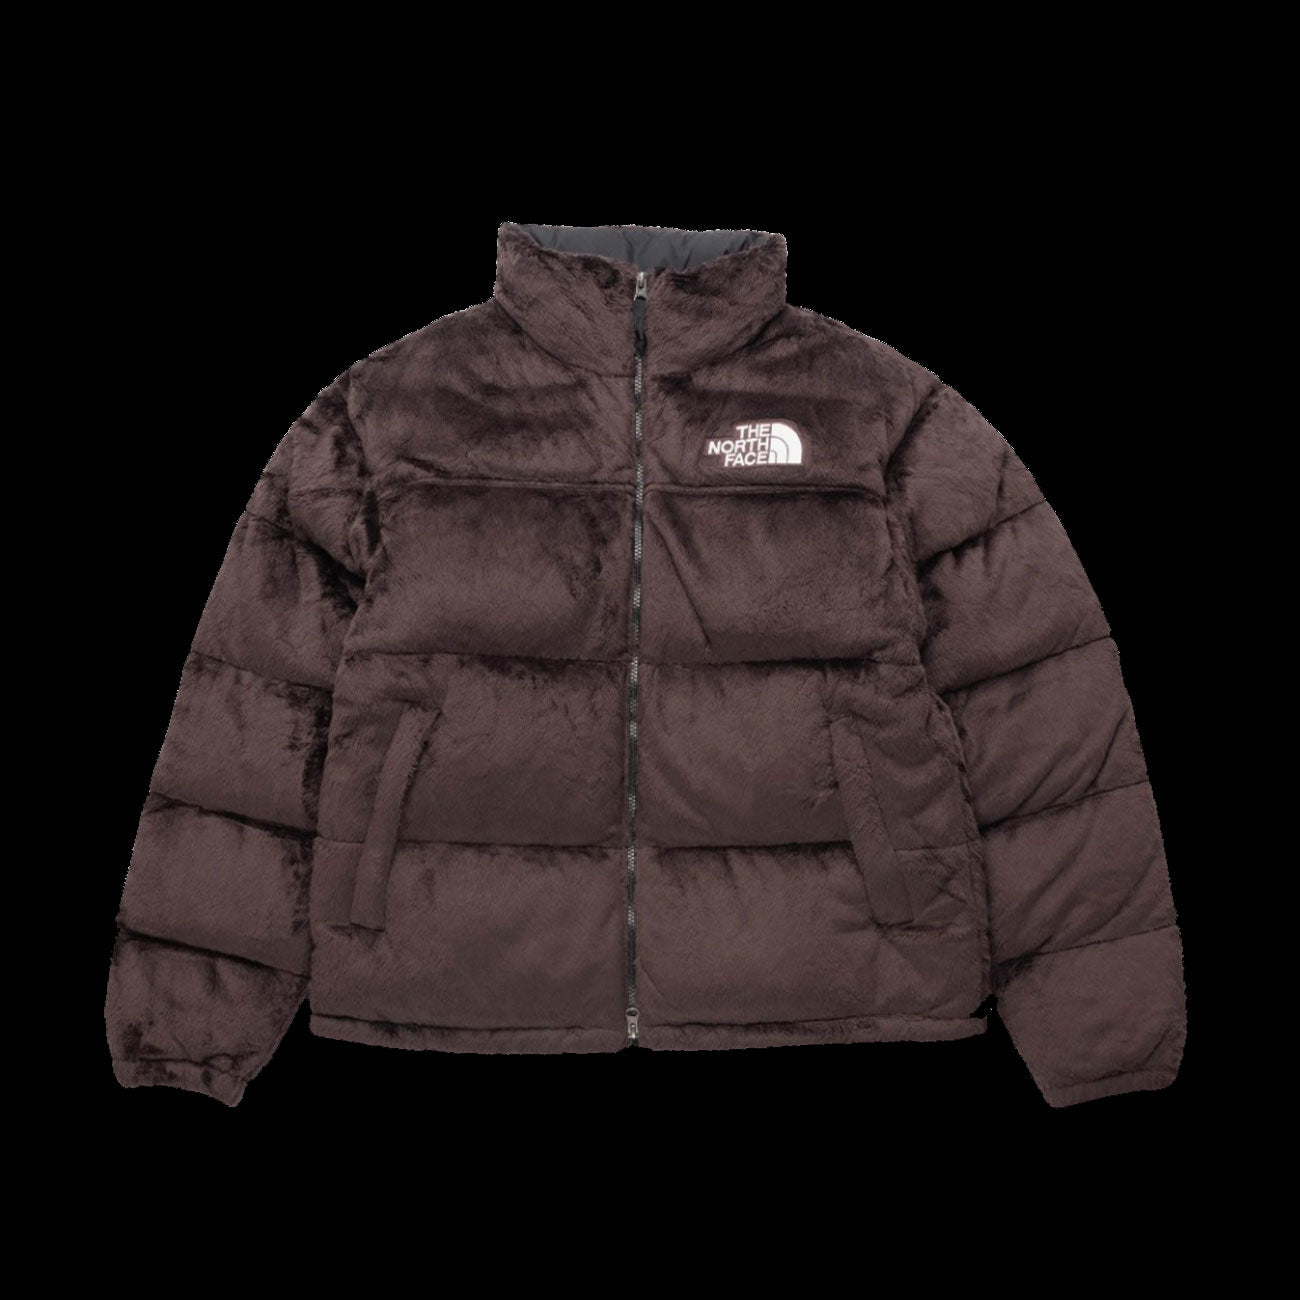 The North Face Velour Versa (Coal Brown) – Two 18